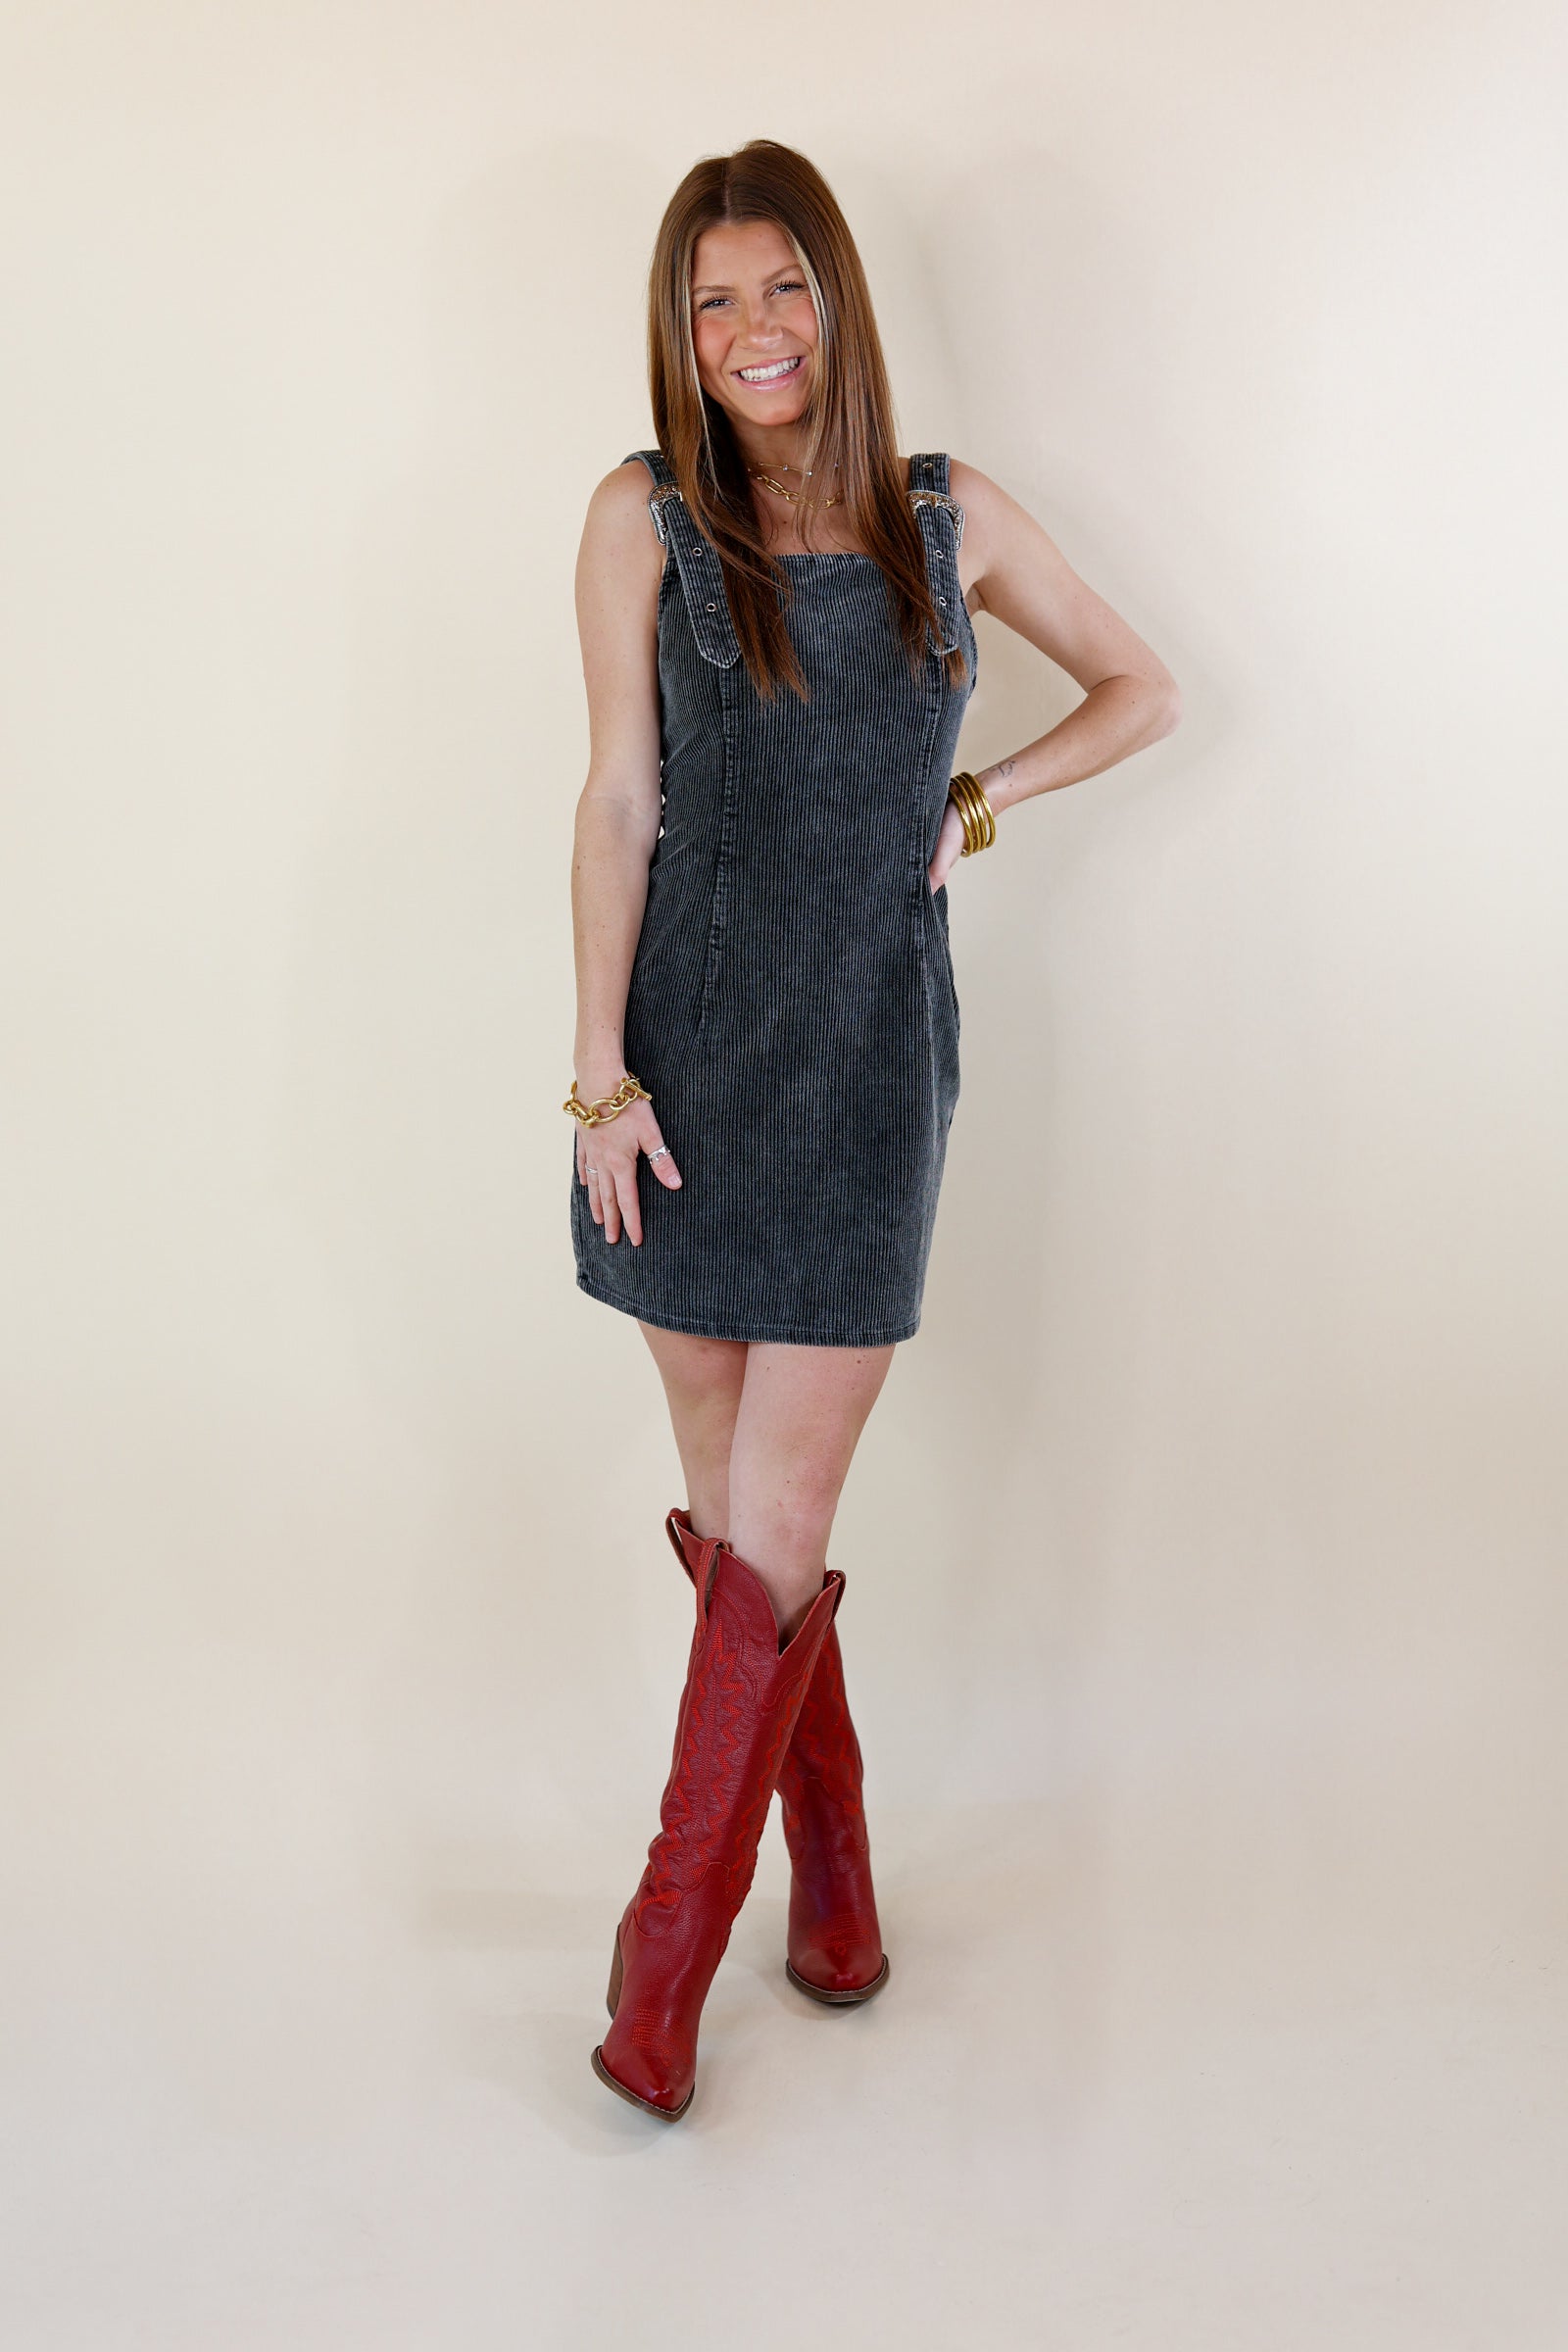 Easy To Style Corduroy Overall Dress with Silver Buckles in Charcoal Black - Giddy Up Glamour Boutique